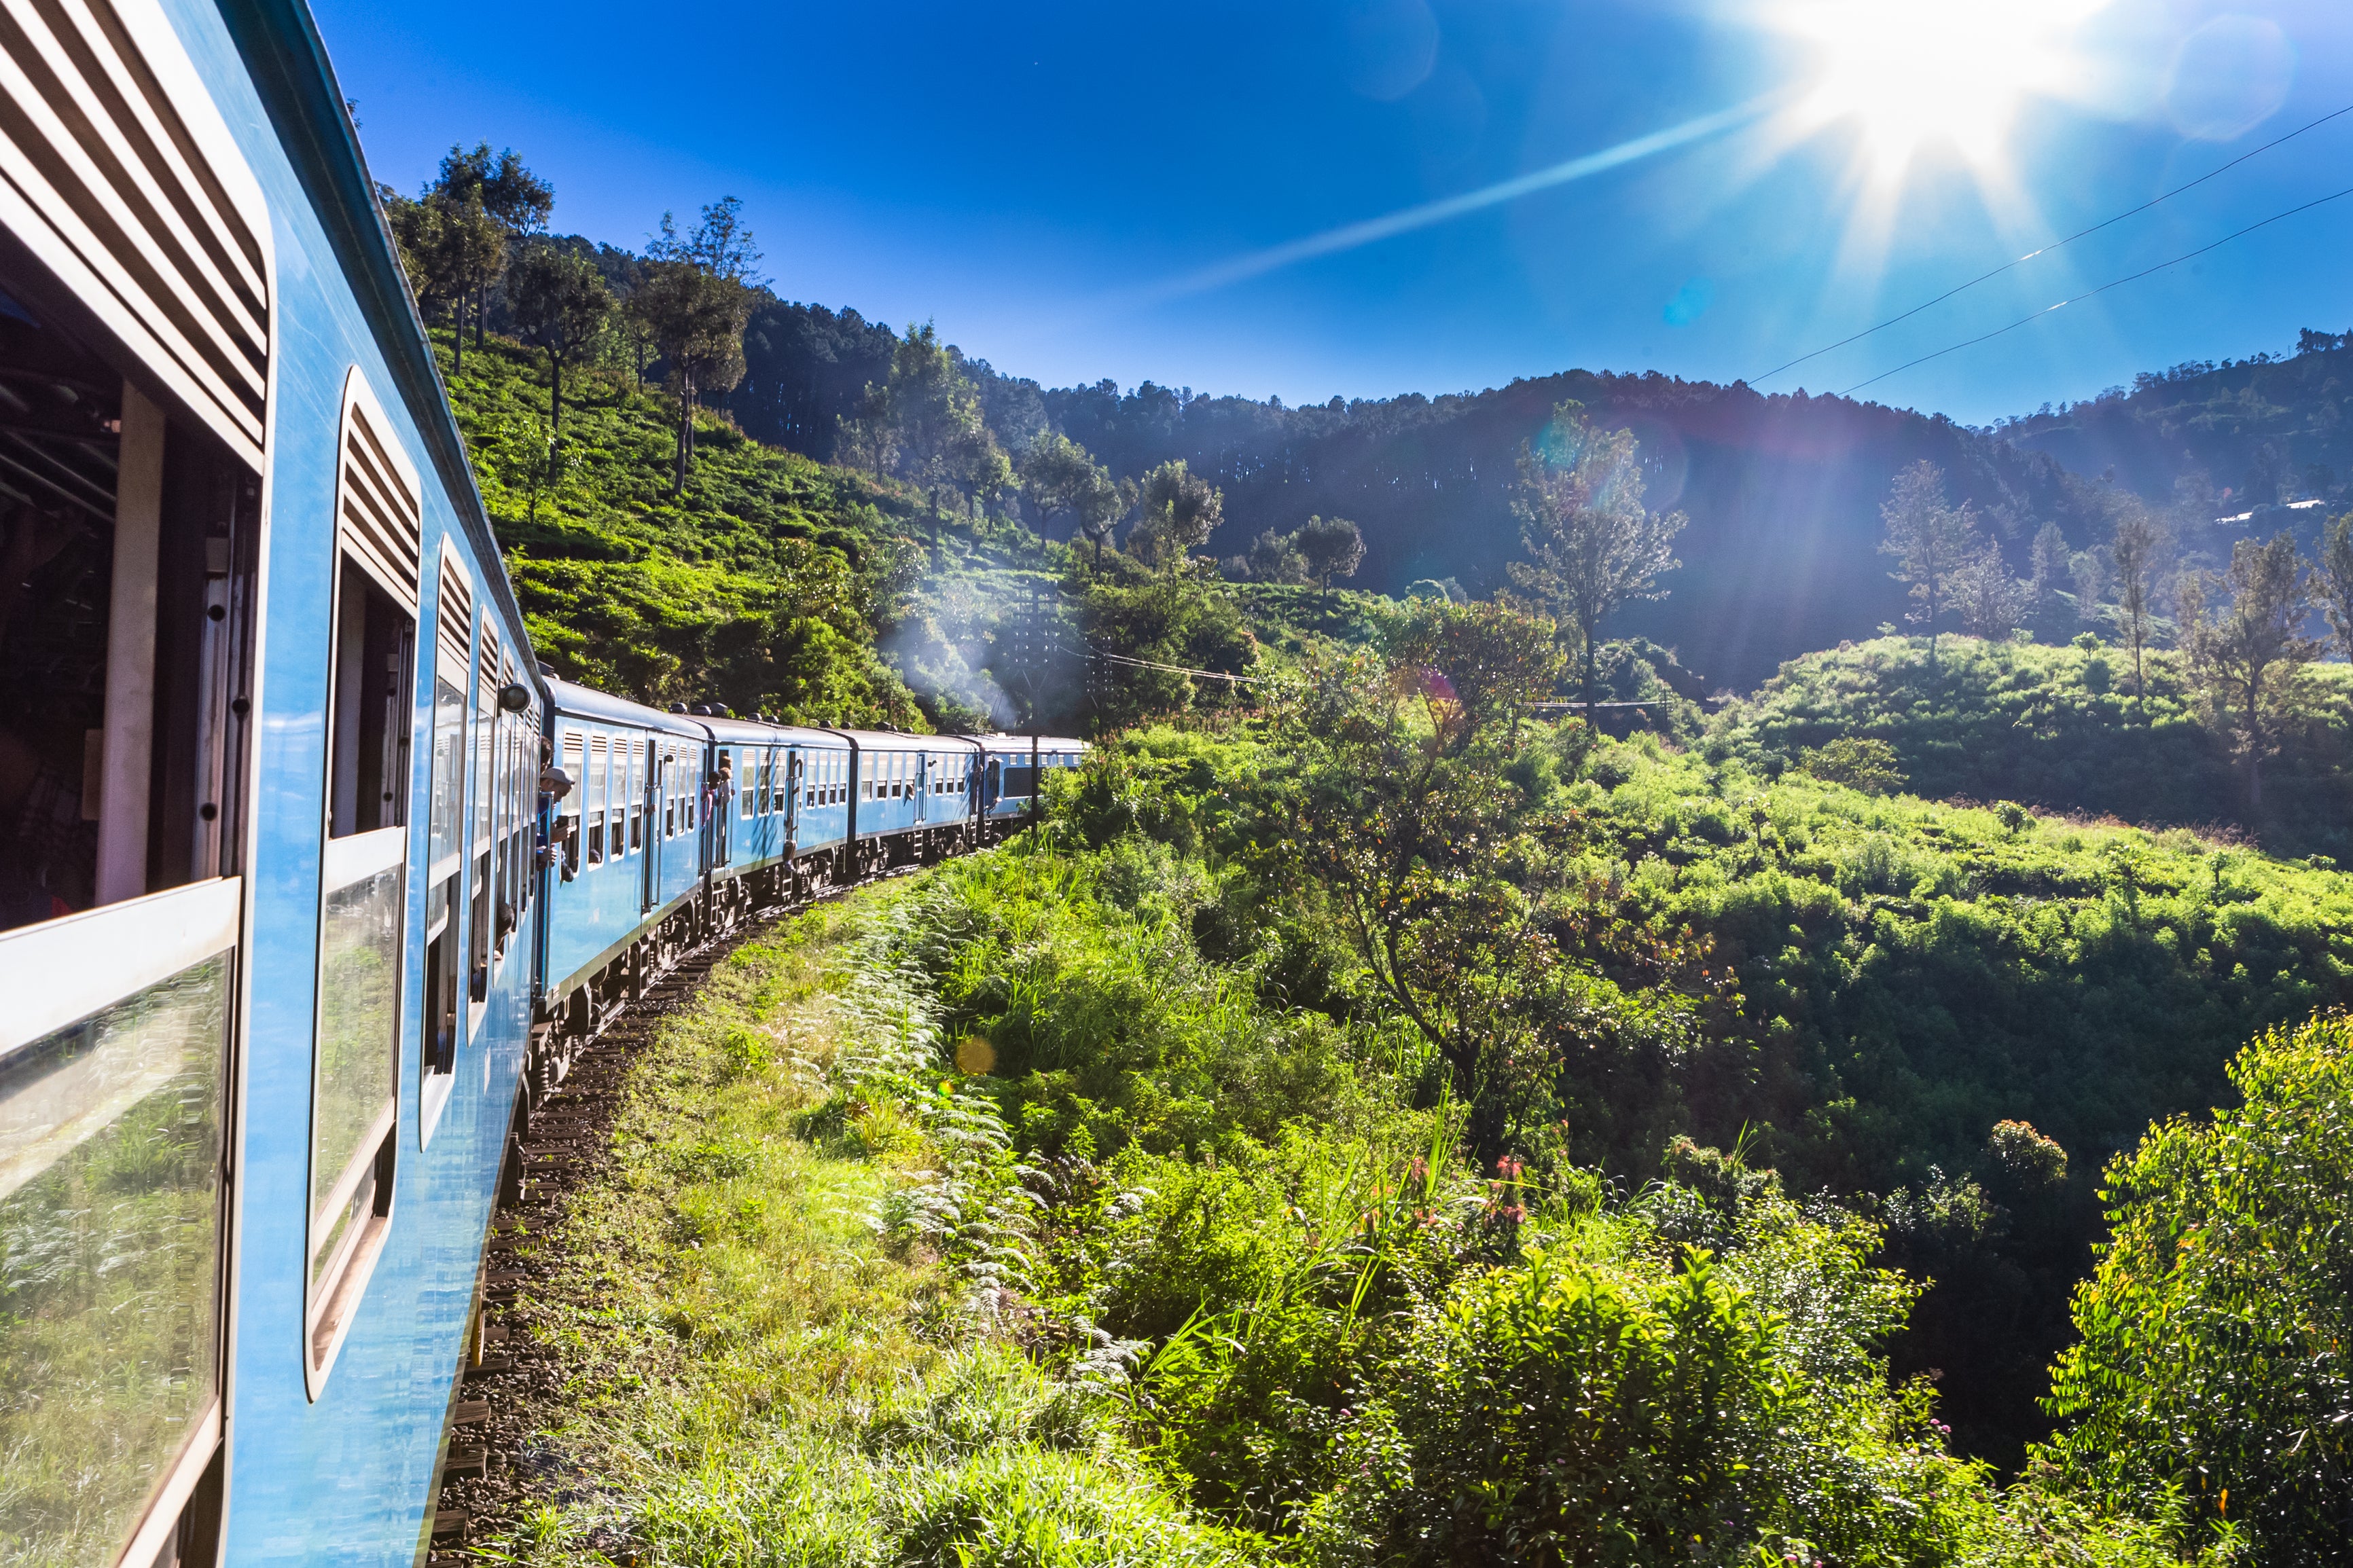 Sri Lanka’s Main Line is considered to be one of Asia’s most scenic train journeys